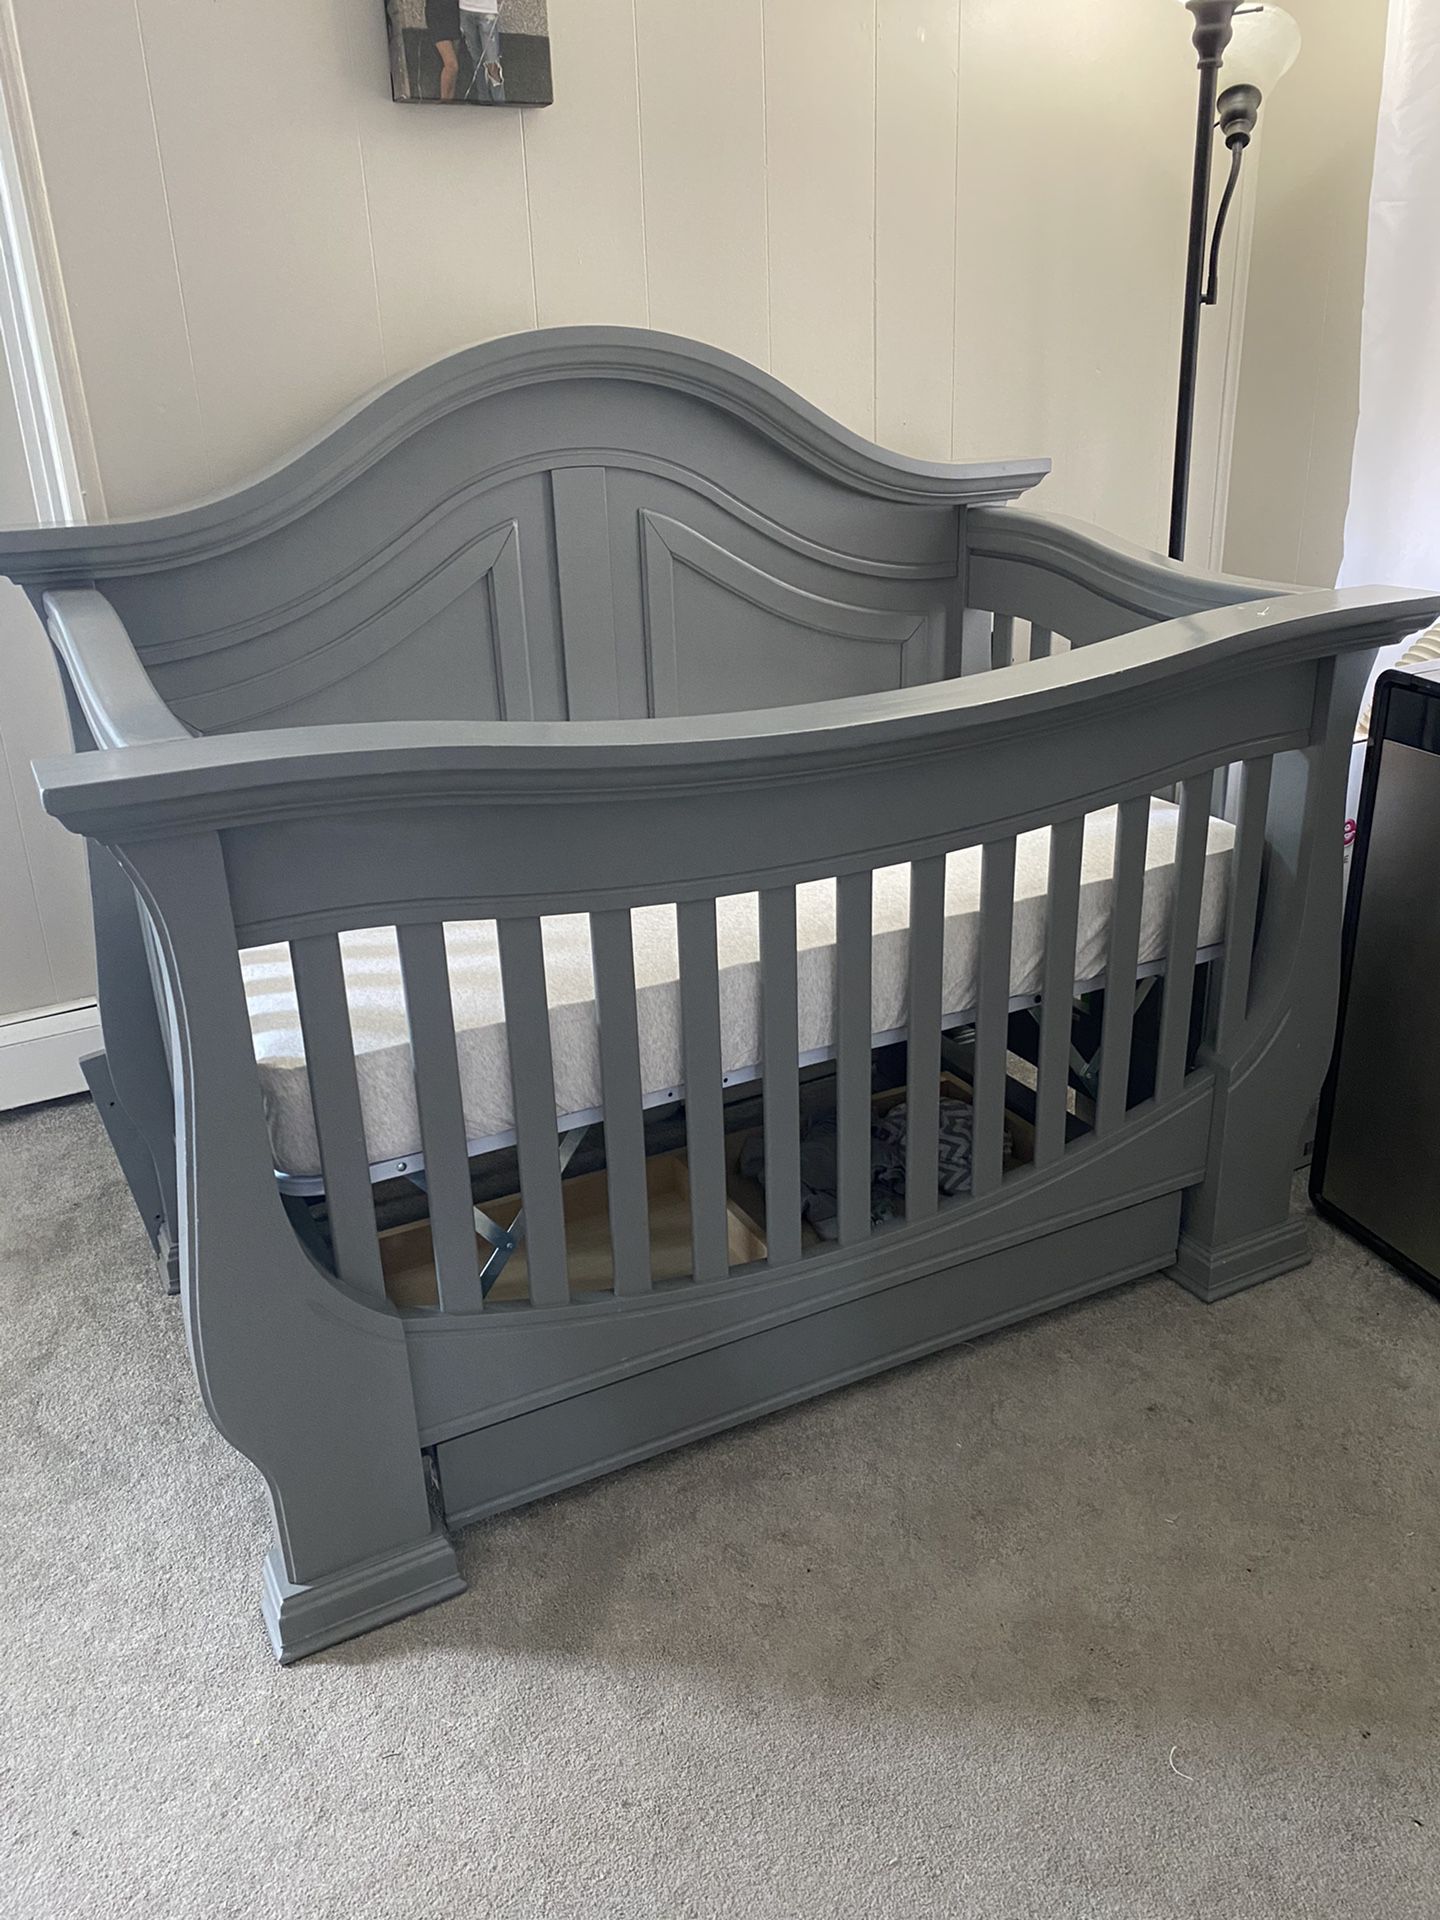 3 In 1 Crib With Drawers Underneath